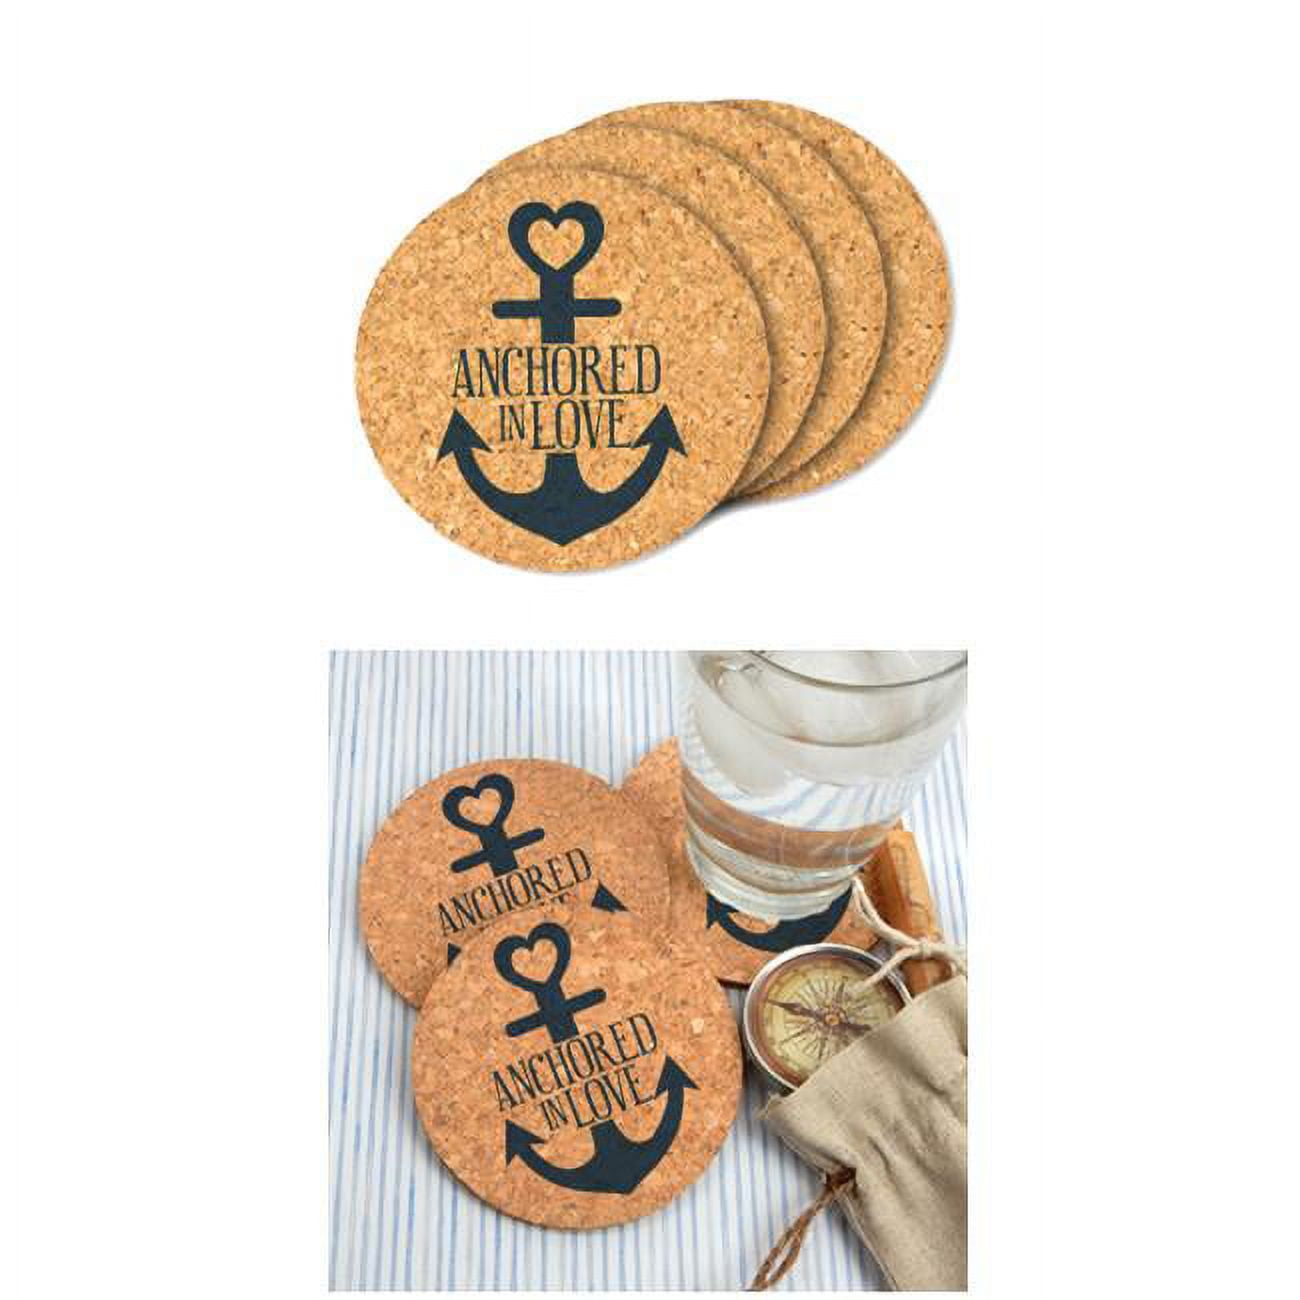 Picture of Ducky Days 8417184 4 in. Dia. Anchored in Love Round Cork Coaster Wedding Favors - Set of 4